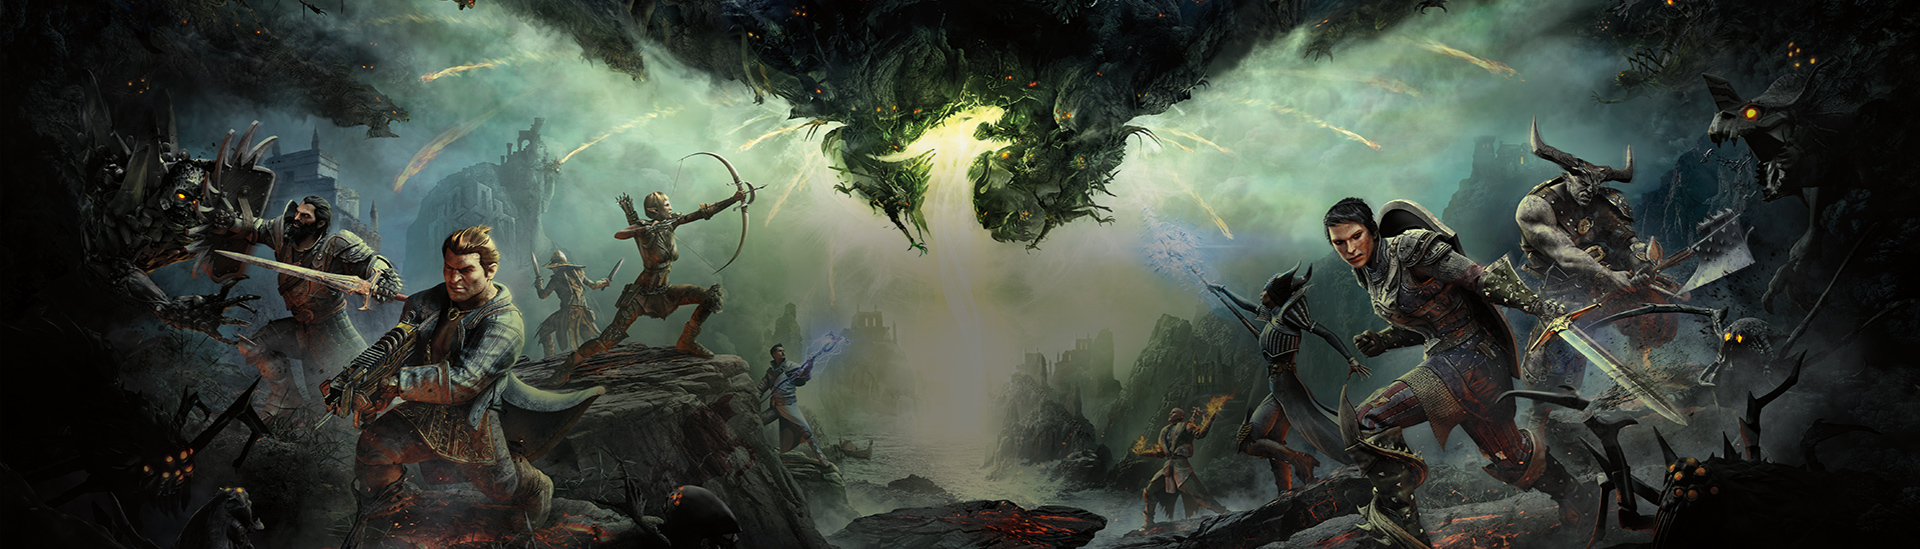 download dragon age inquisition for pc